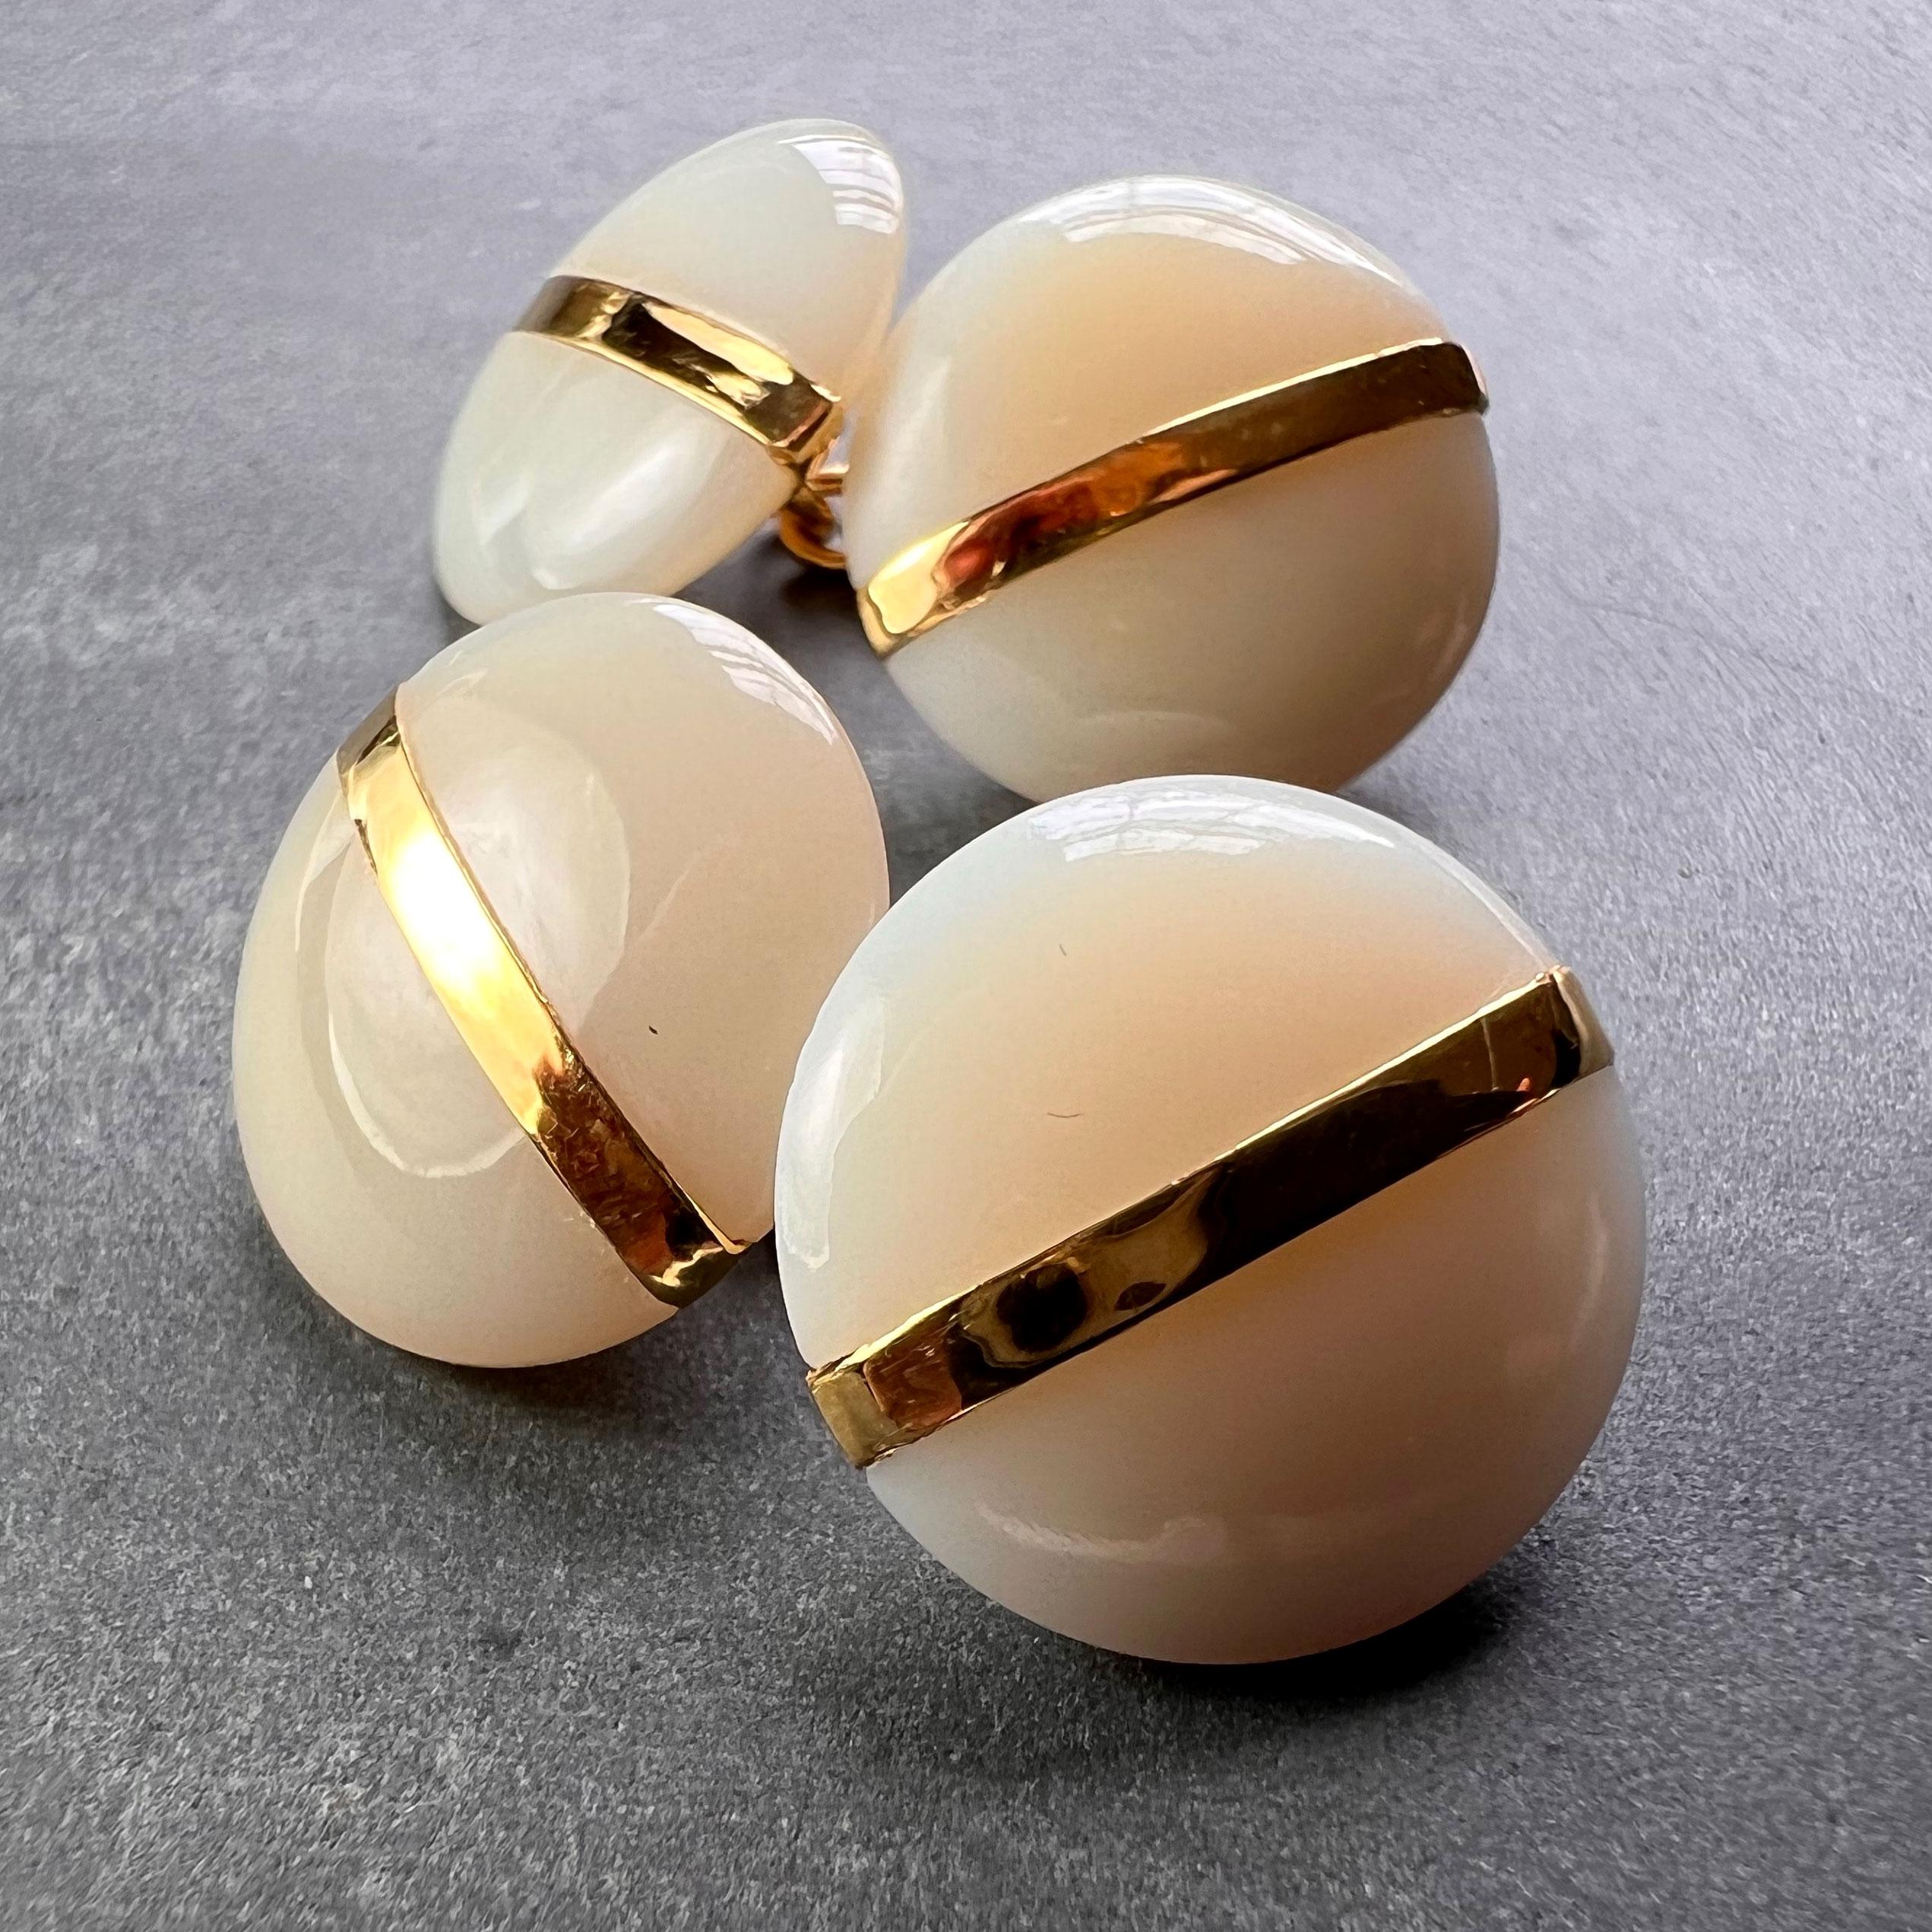 A pair of French 18K (18 karat) yellow gold cufflinks designed as a pair of white agate circular convex discs with a stripe of gold bisecting each one. Stamped with the eagle’s head for French manufacture and 18 karat gold with an unknown maker’s